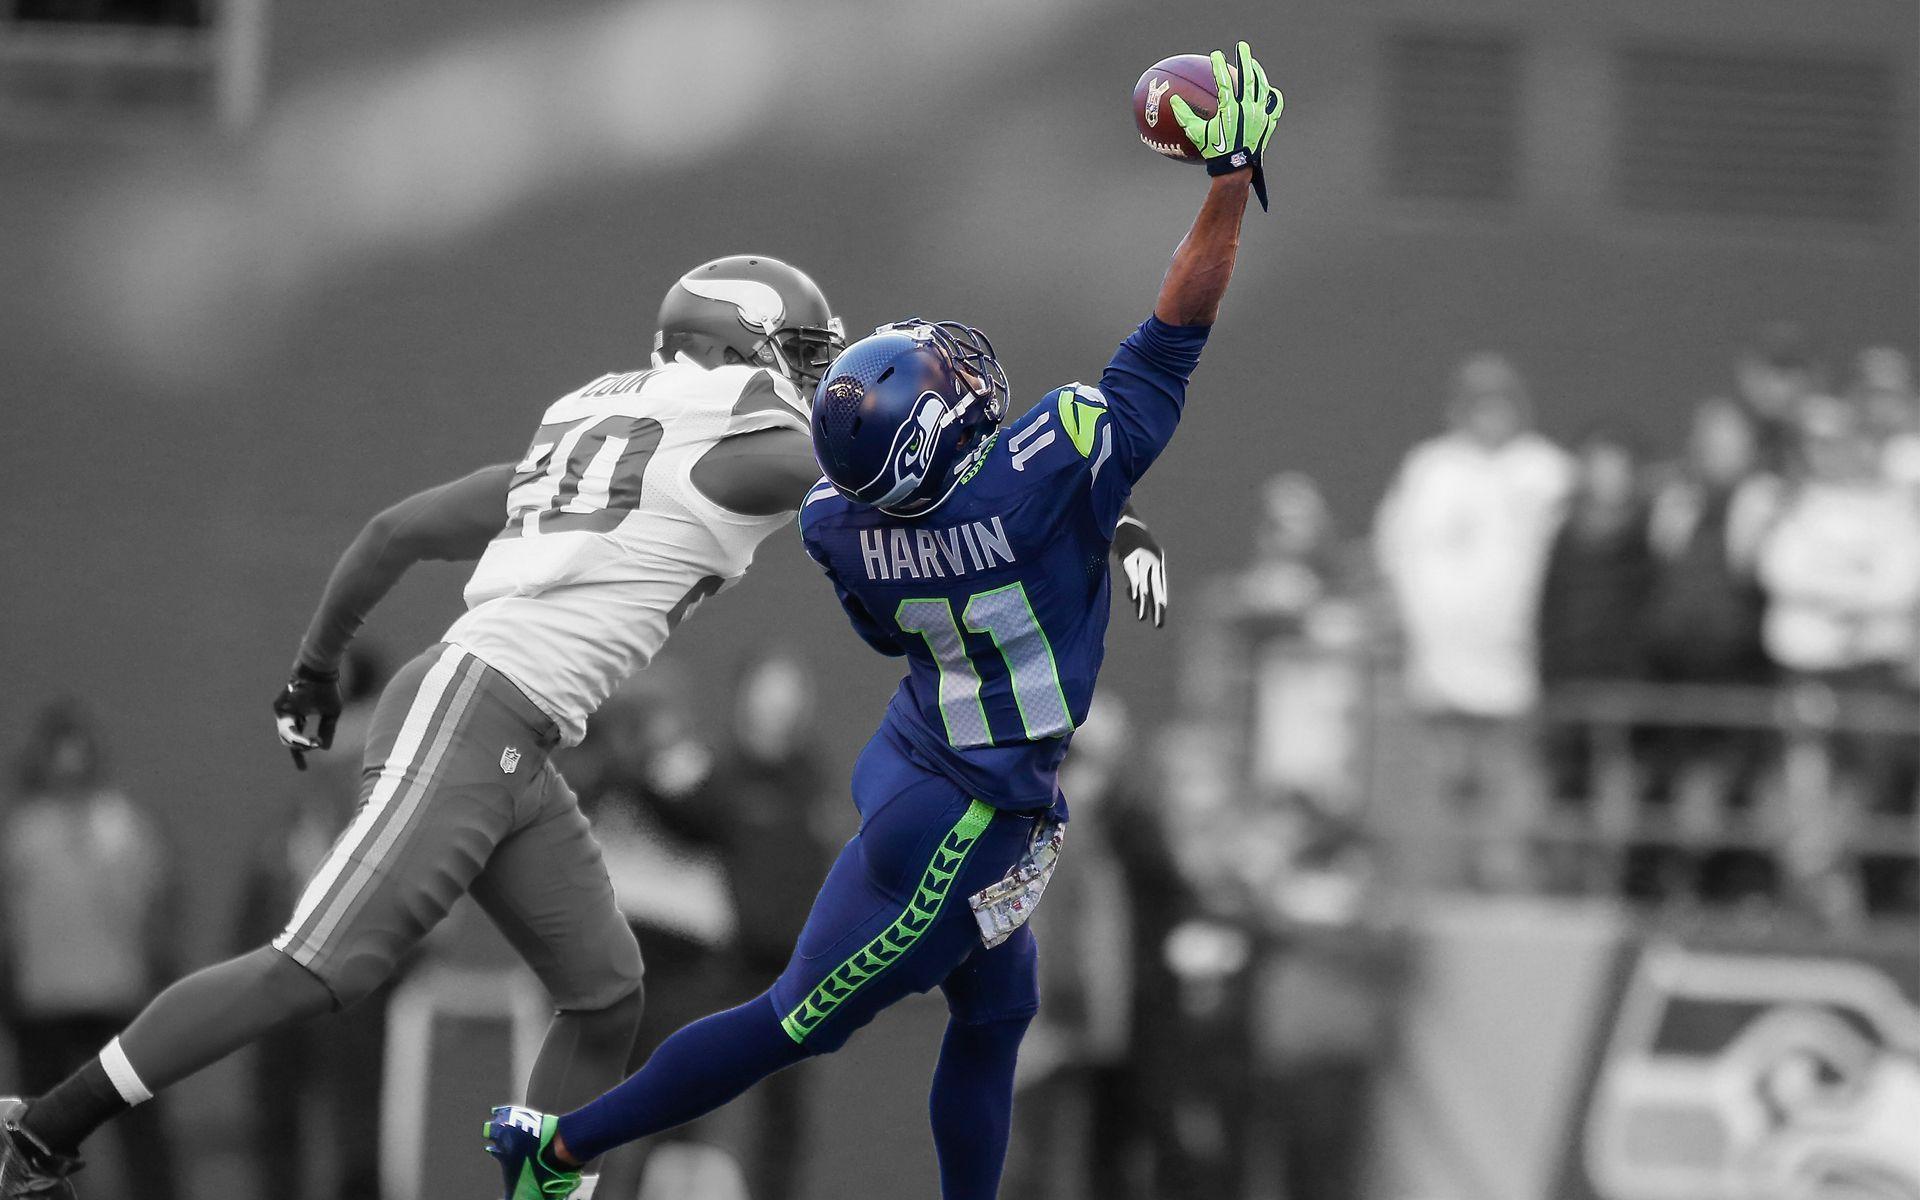 Collection of Seahawks Wallpaper